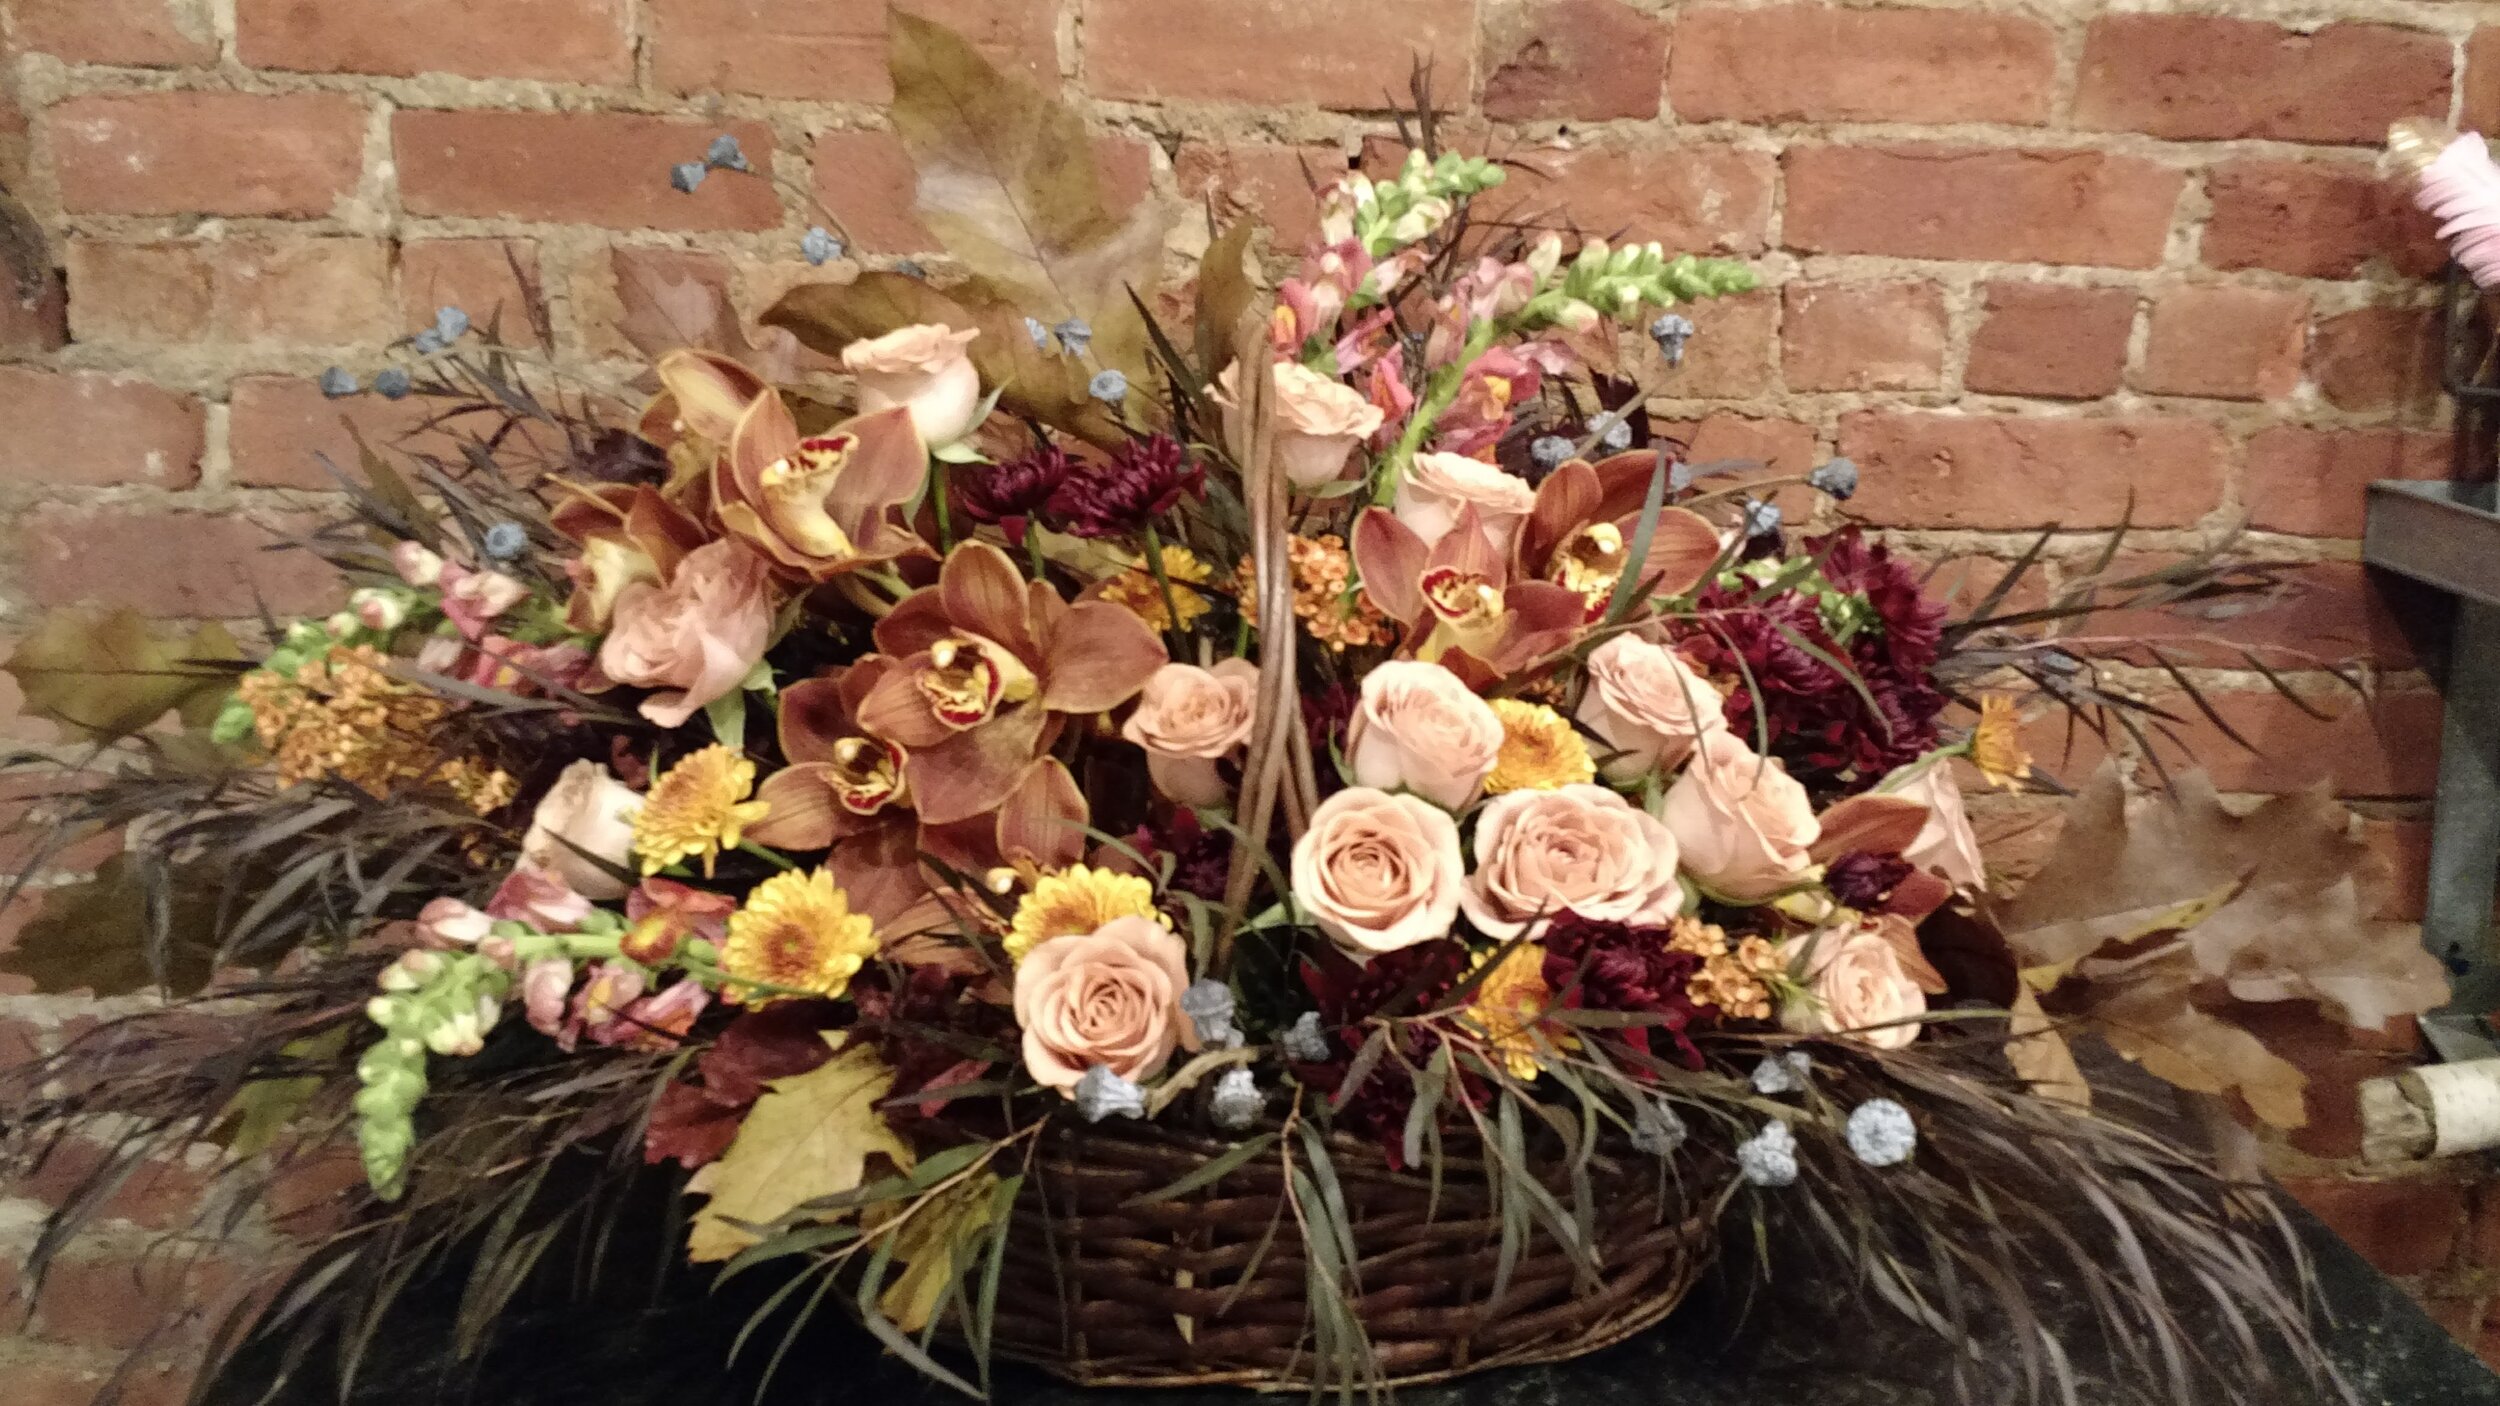 $450 Earth Tone Basket w/ Mocha Orchids and Cappuccino Roses 